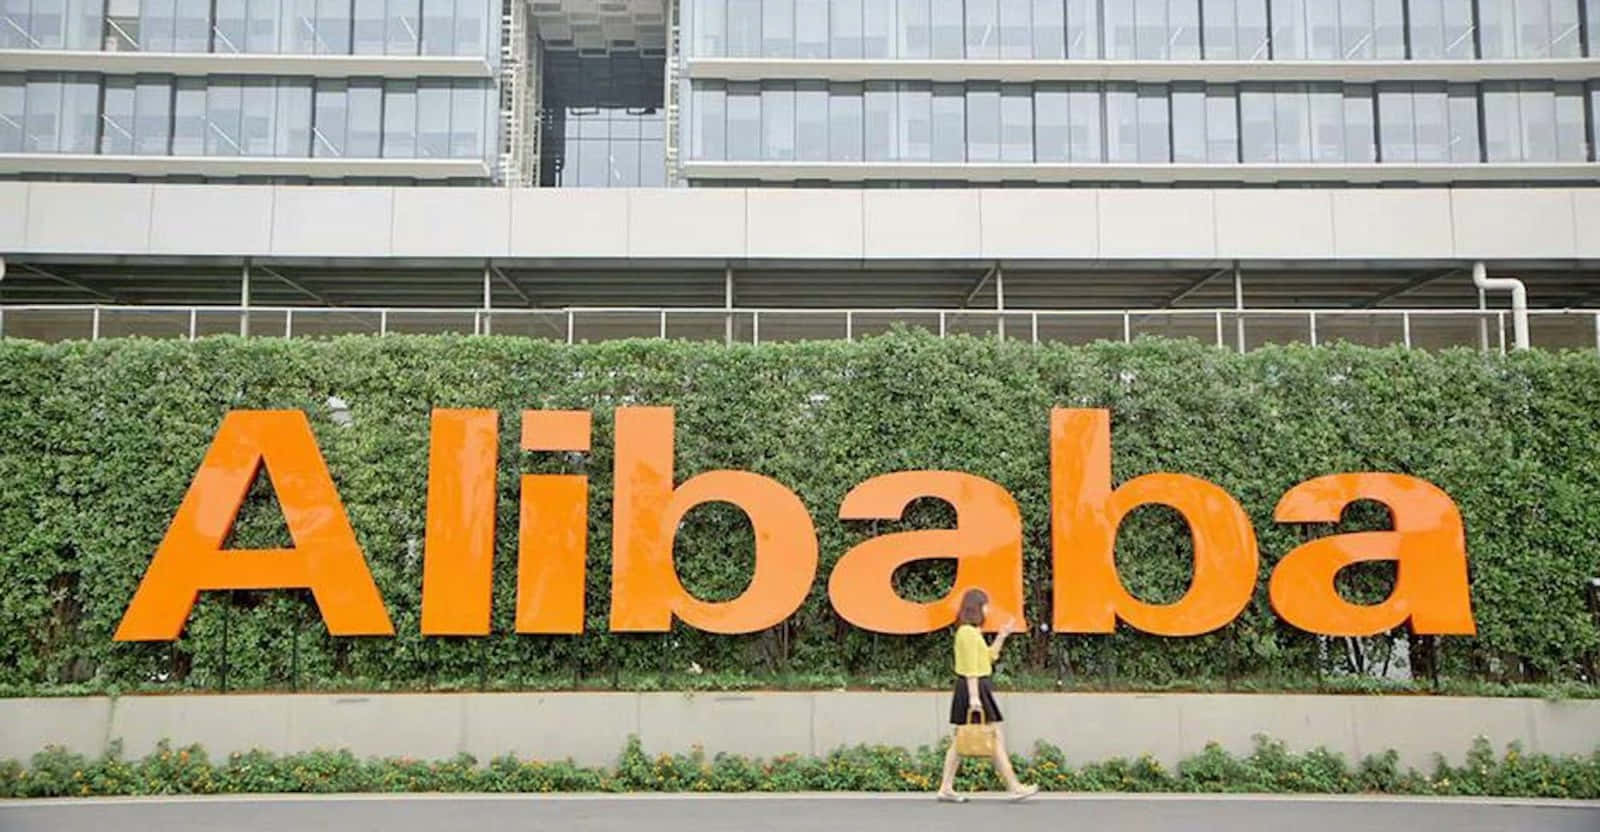 Alibaba is a leading technology and e-commerce giant